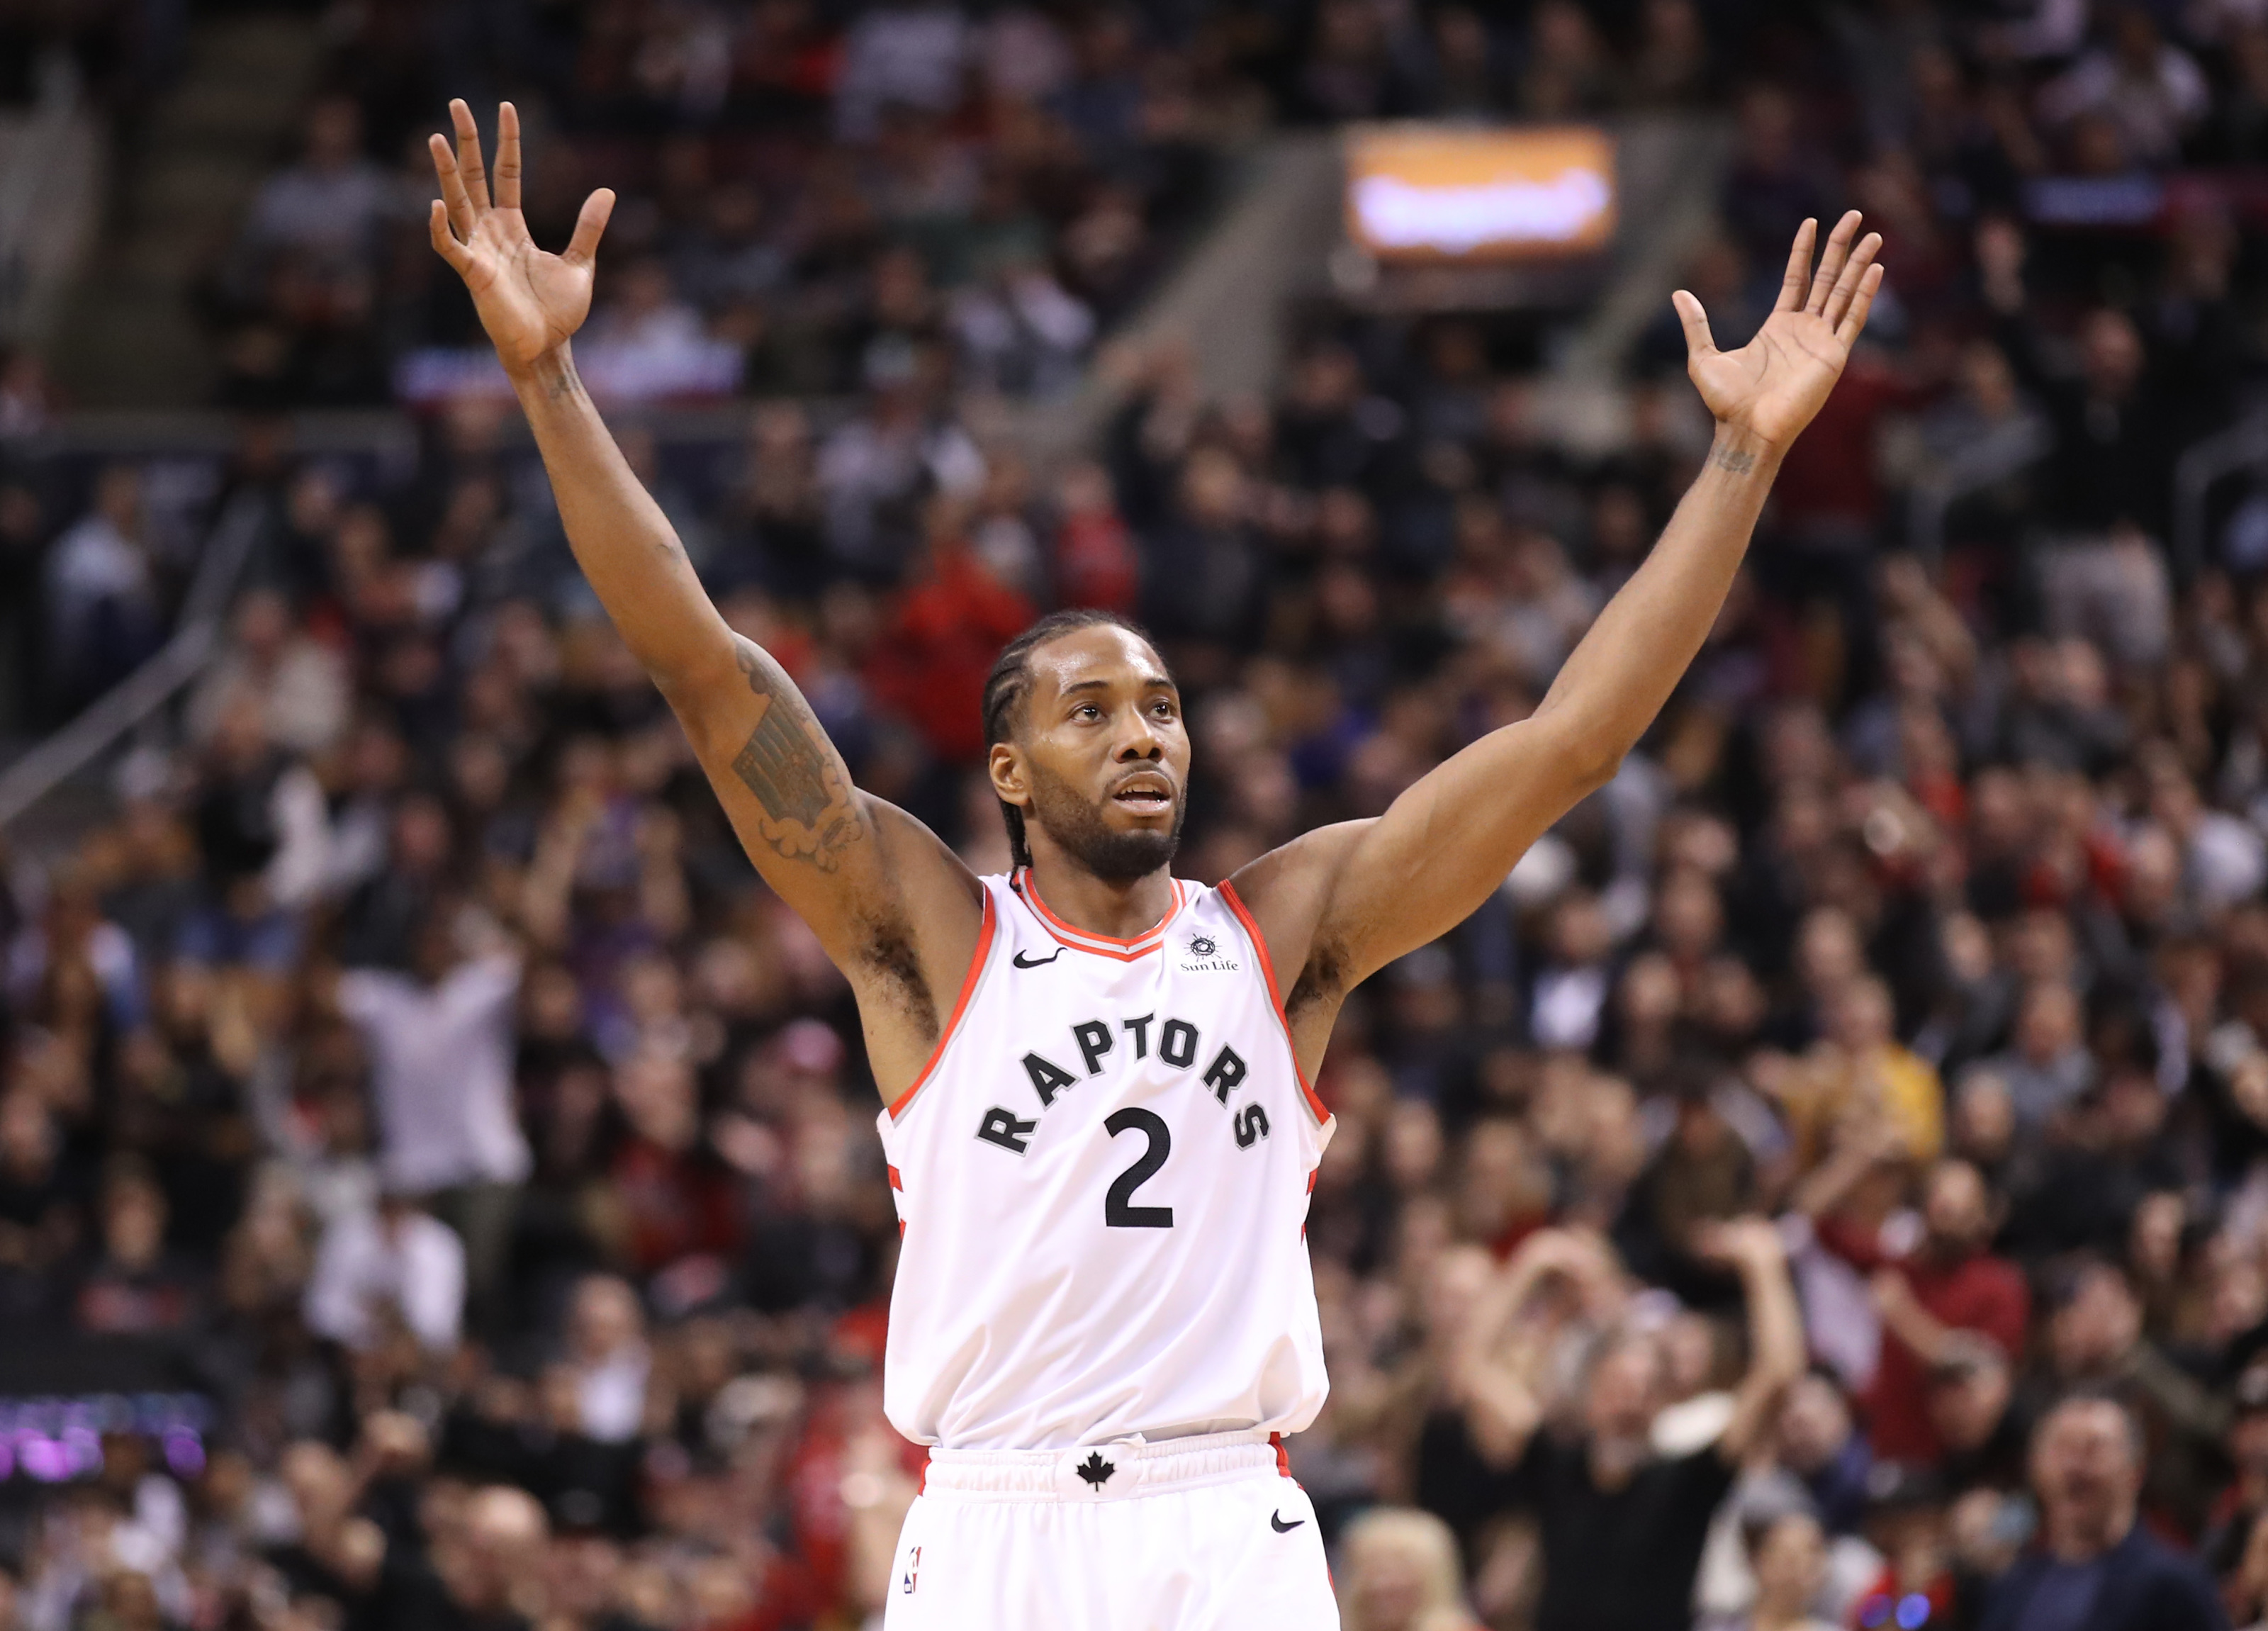 Who should have their jersey number retired by the Toronto Raptors